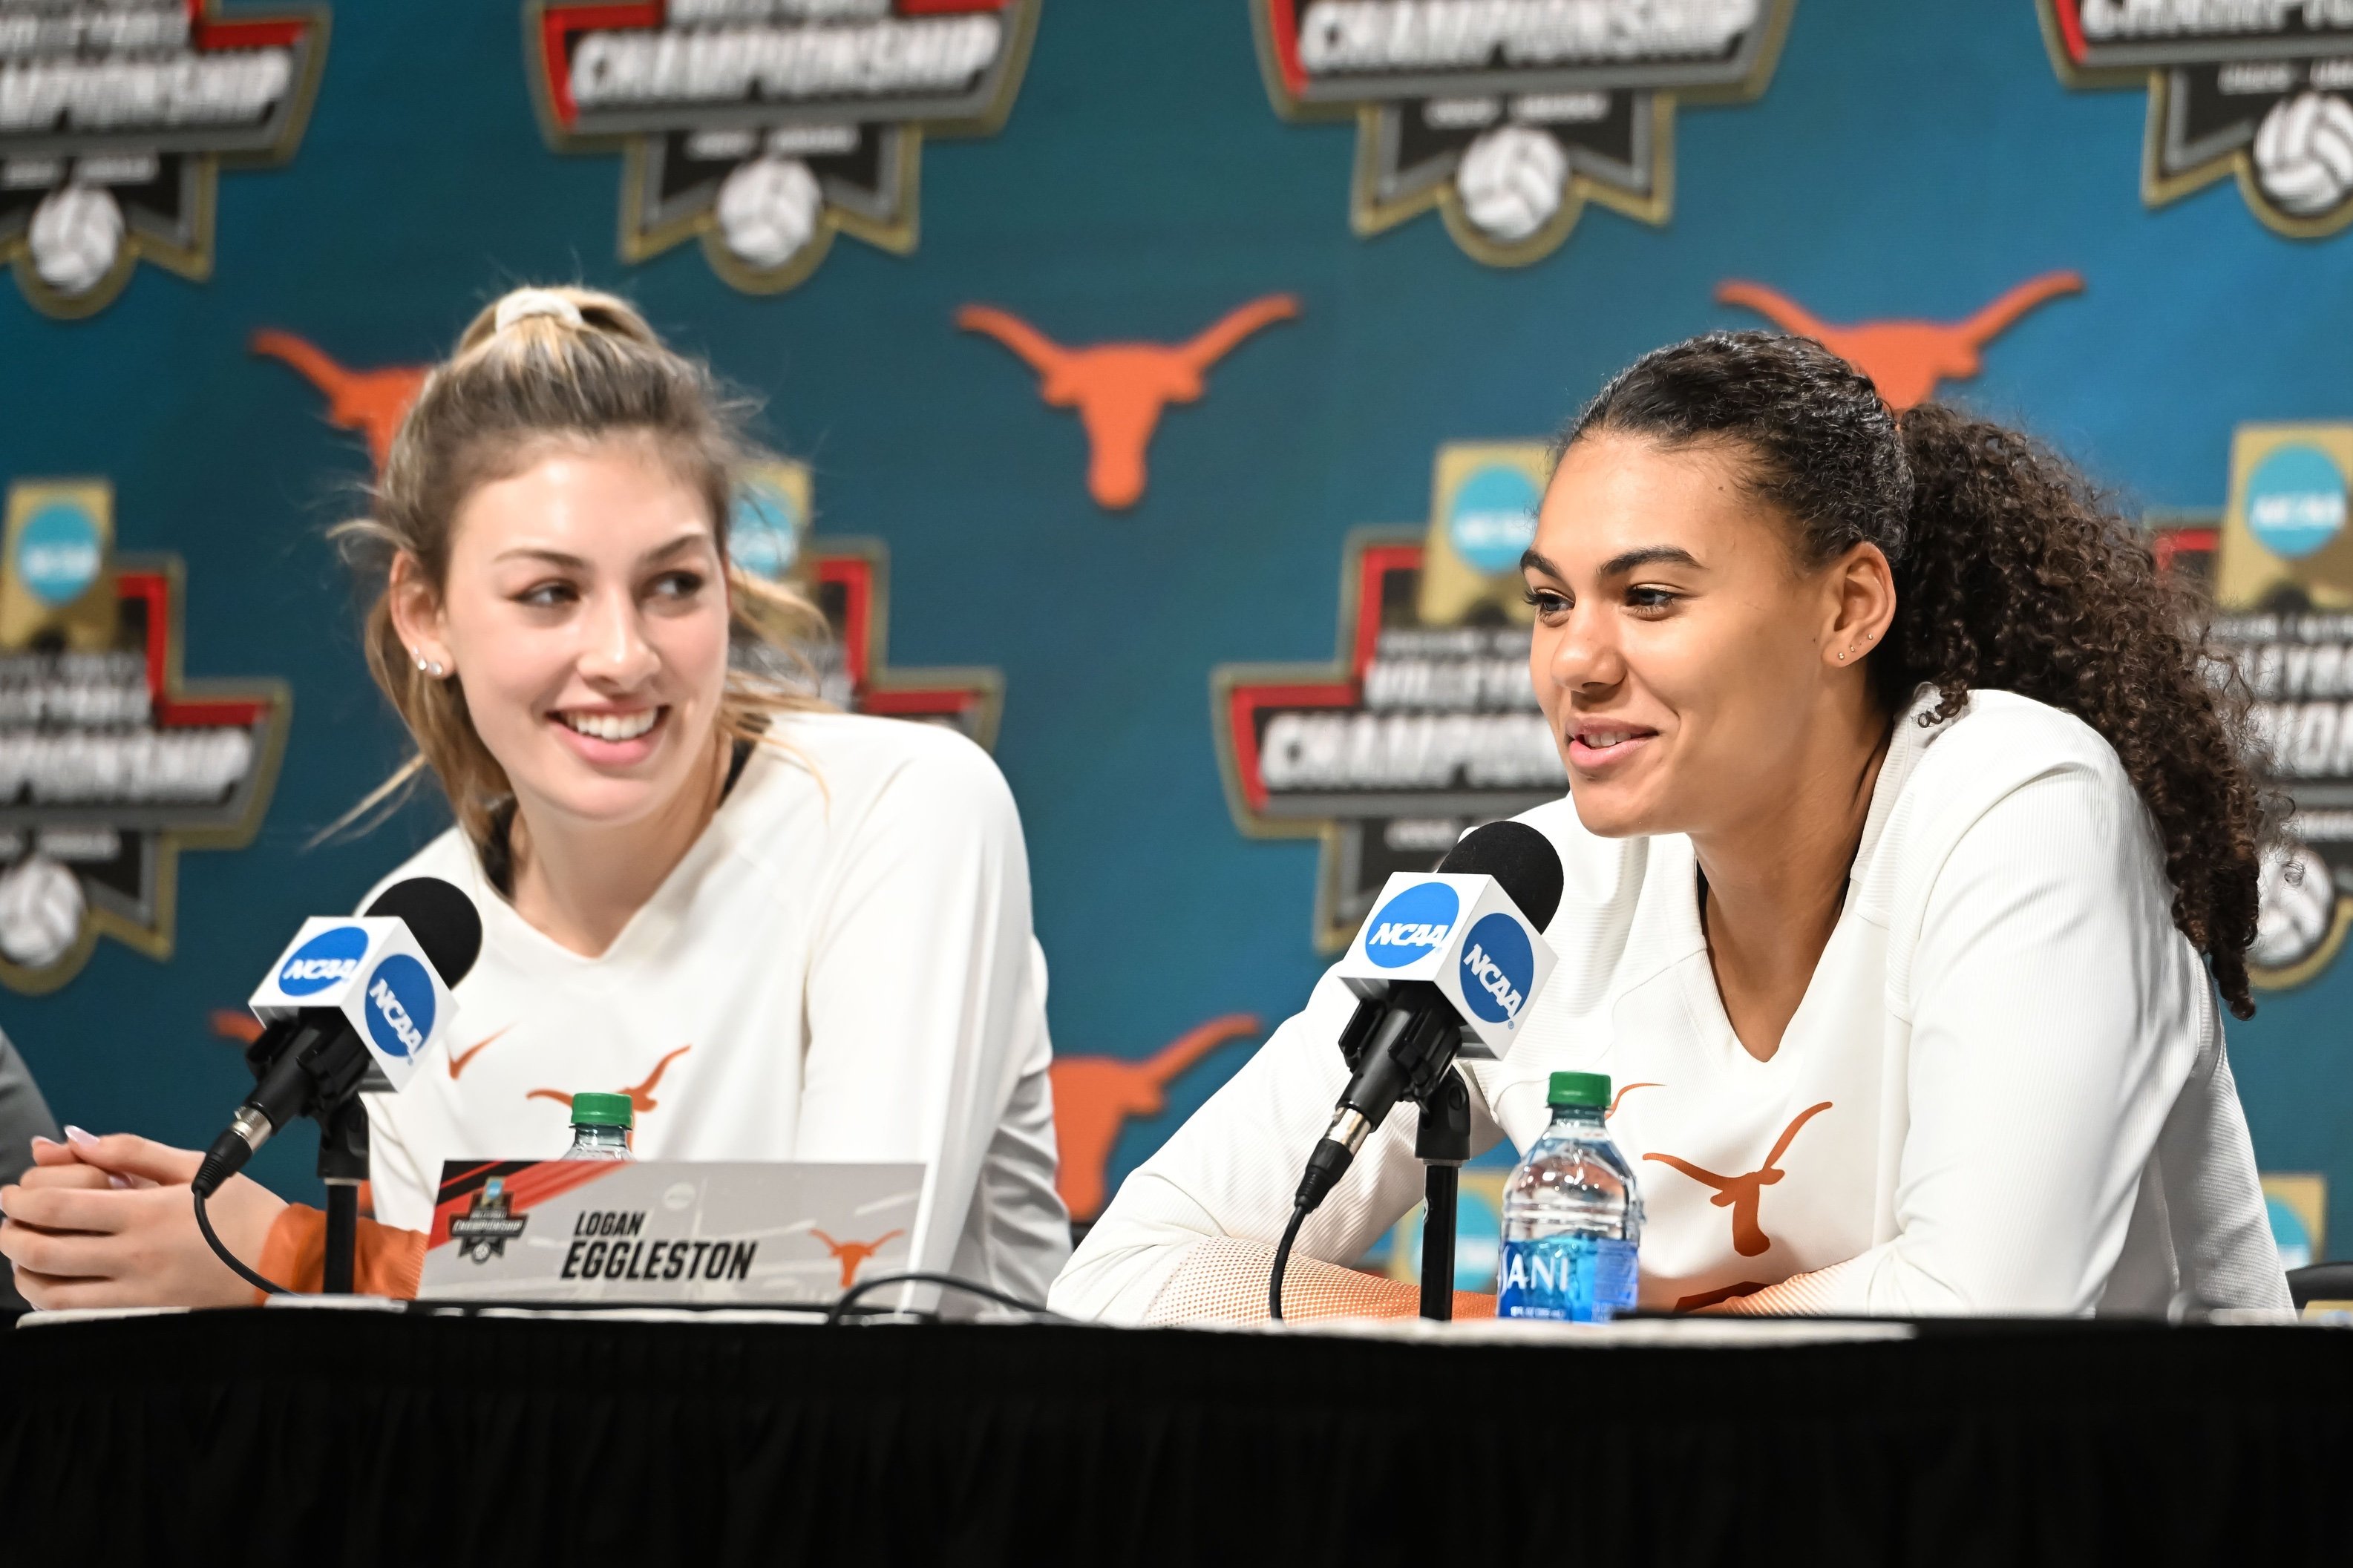 Tonight Will Texas Volleyball secure the National Championship title